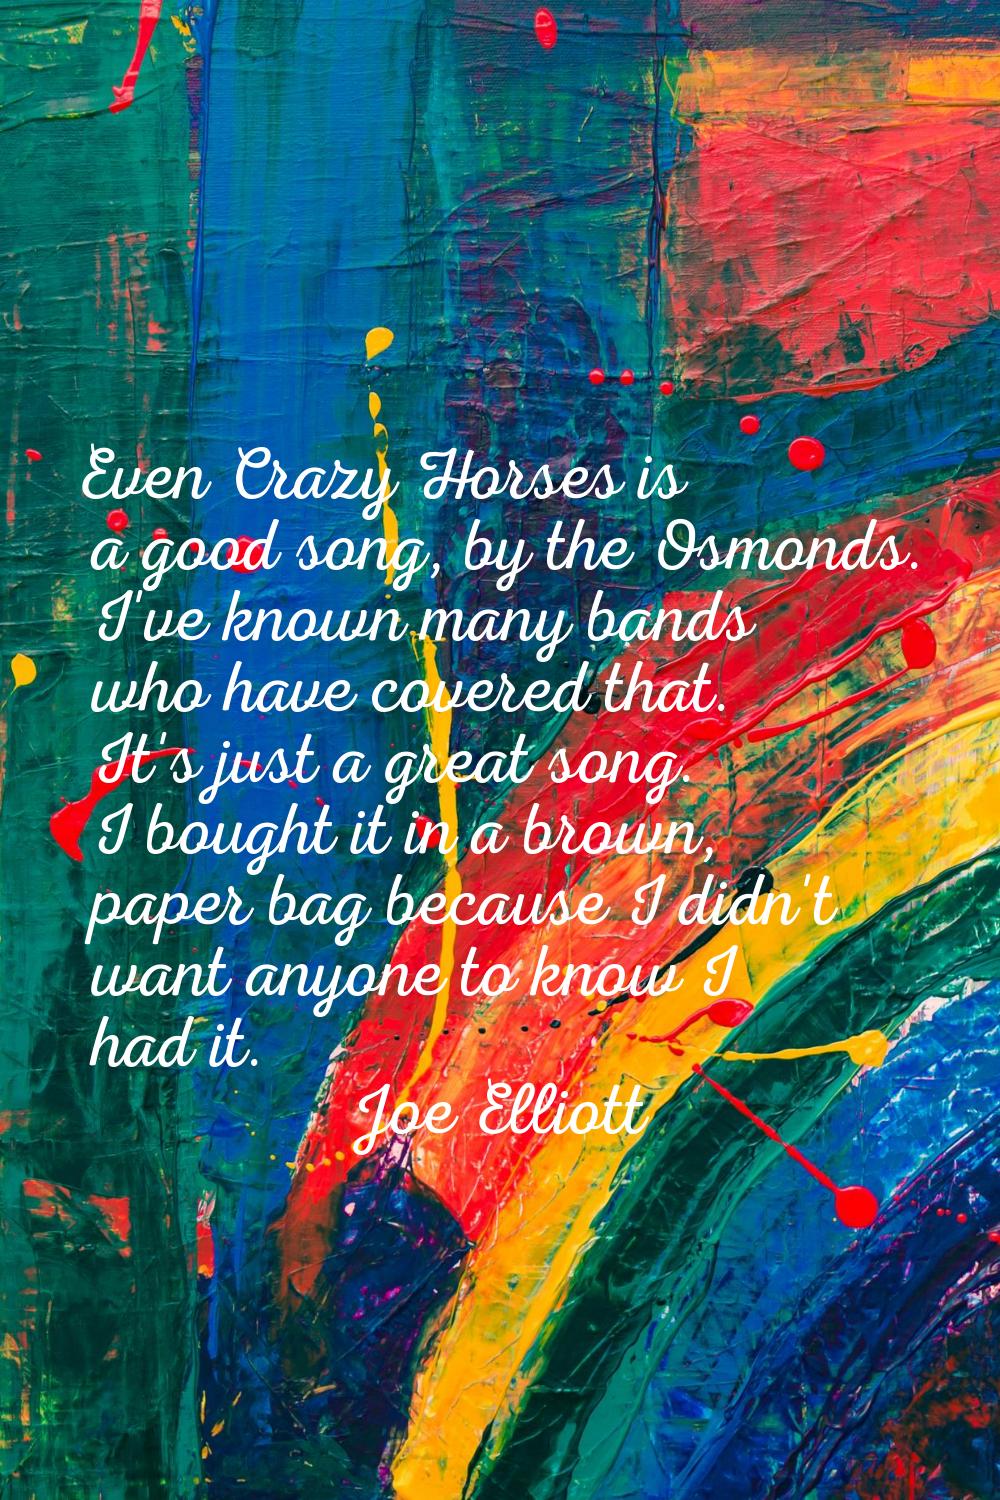 Even Crazy Horses is a good song, by the Osmonds. I've known many bands who have covered that. It's